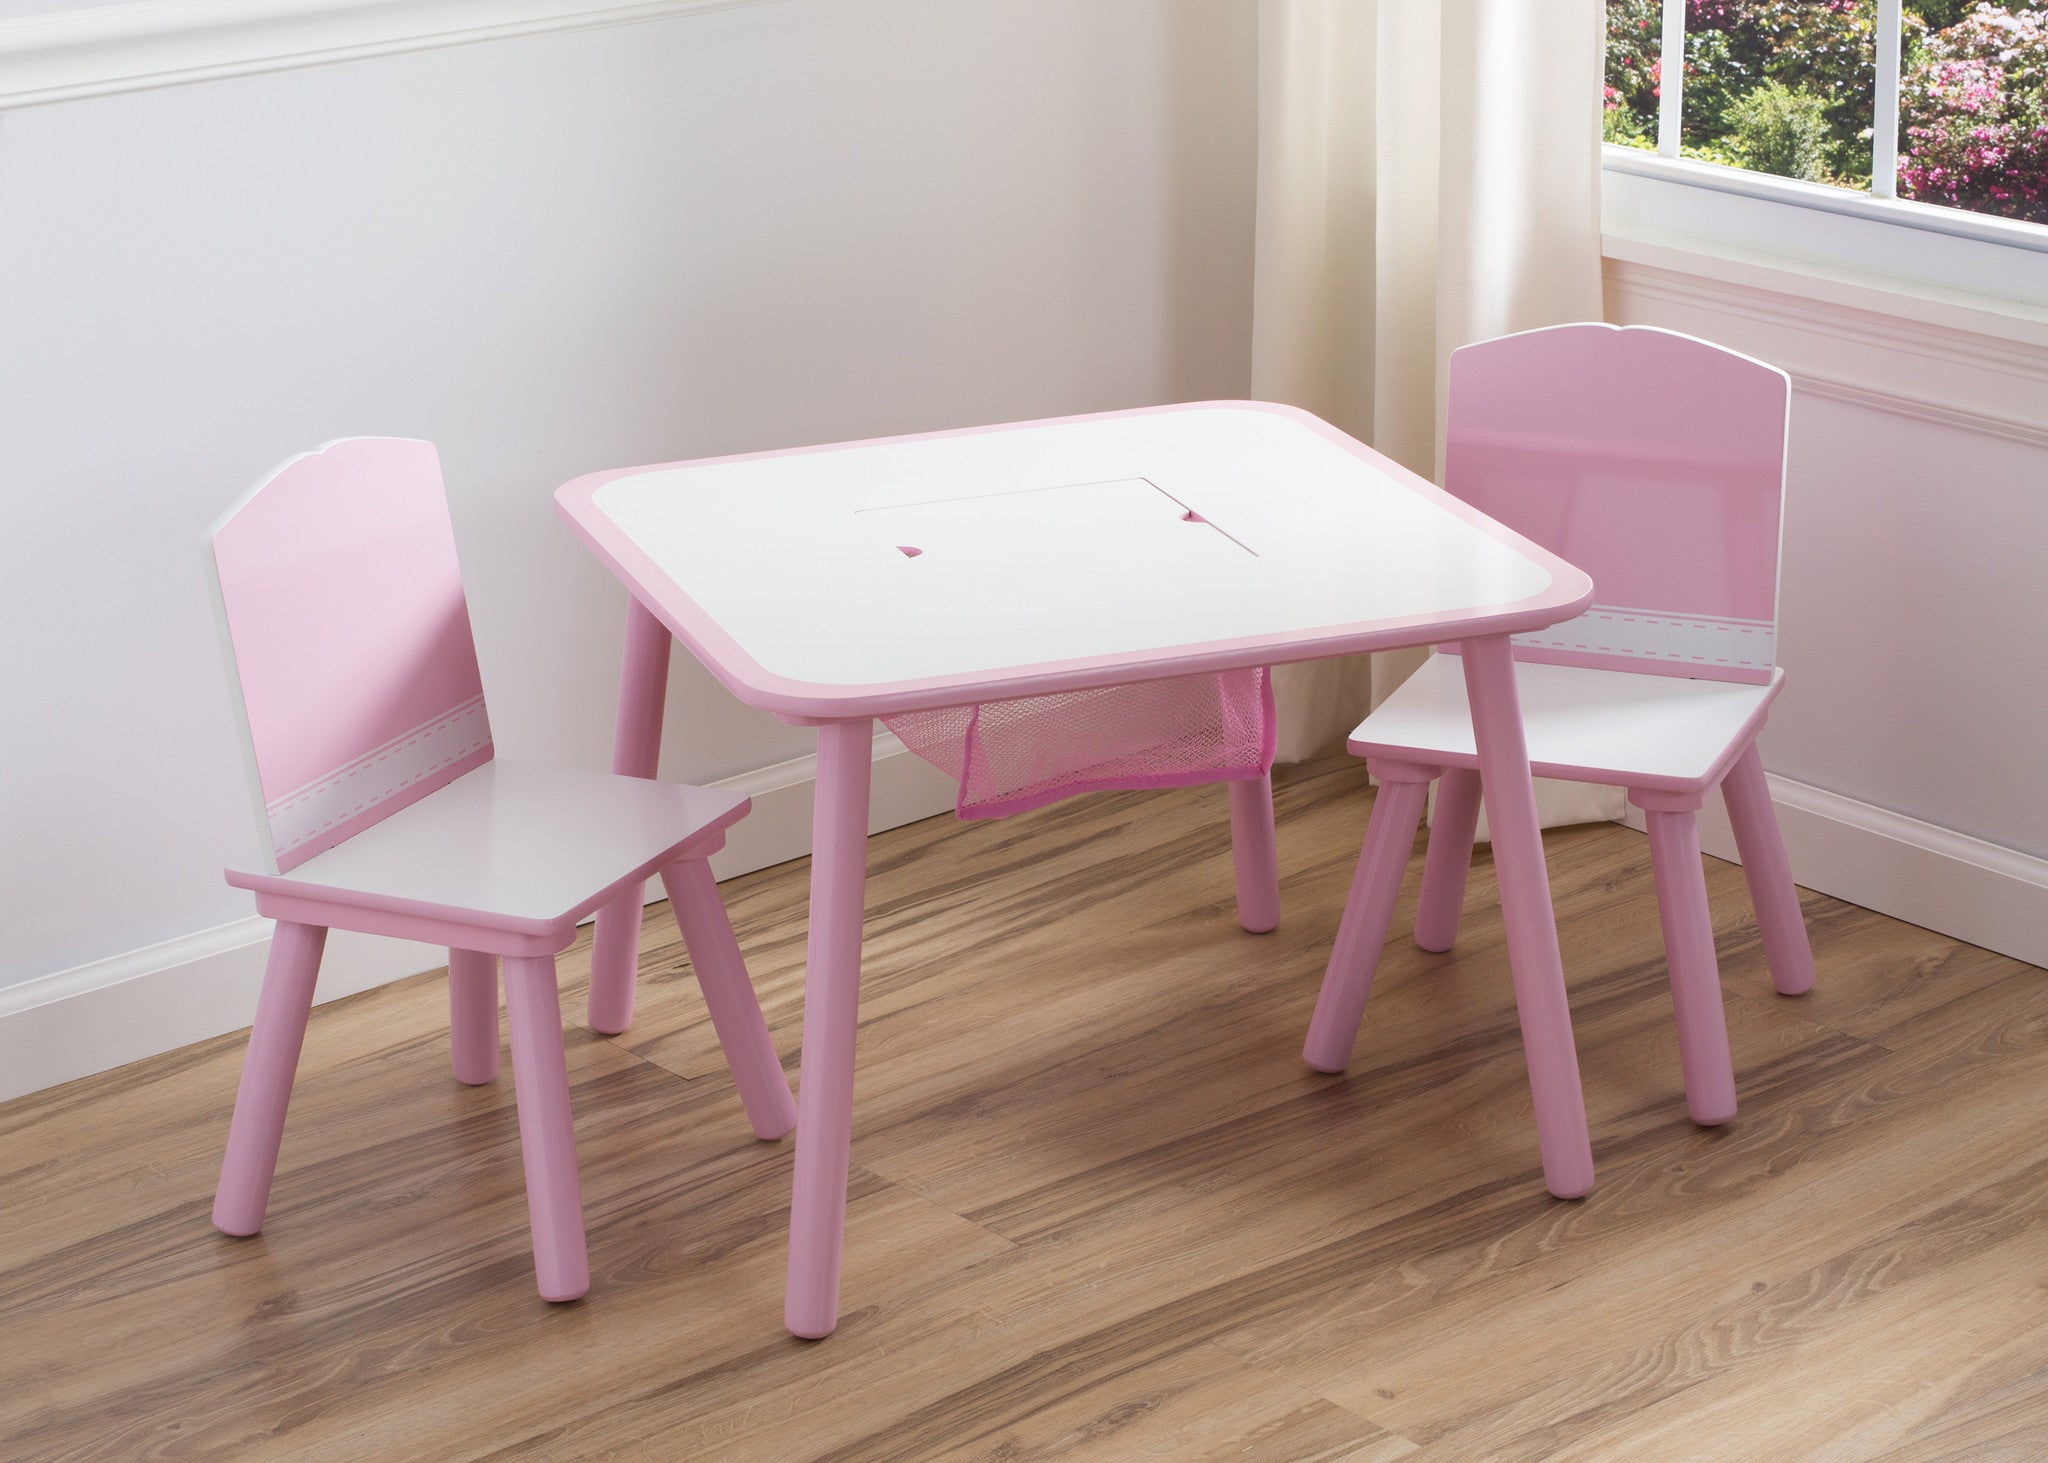 Generic Pink Table and Chair Set with Storage | delta children eu pim